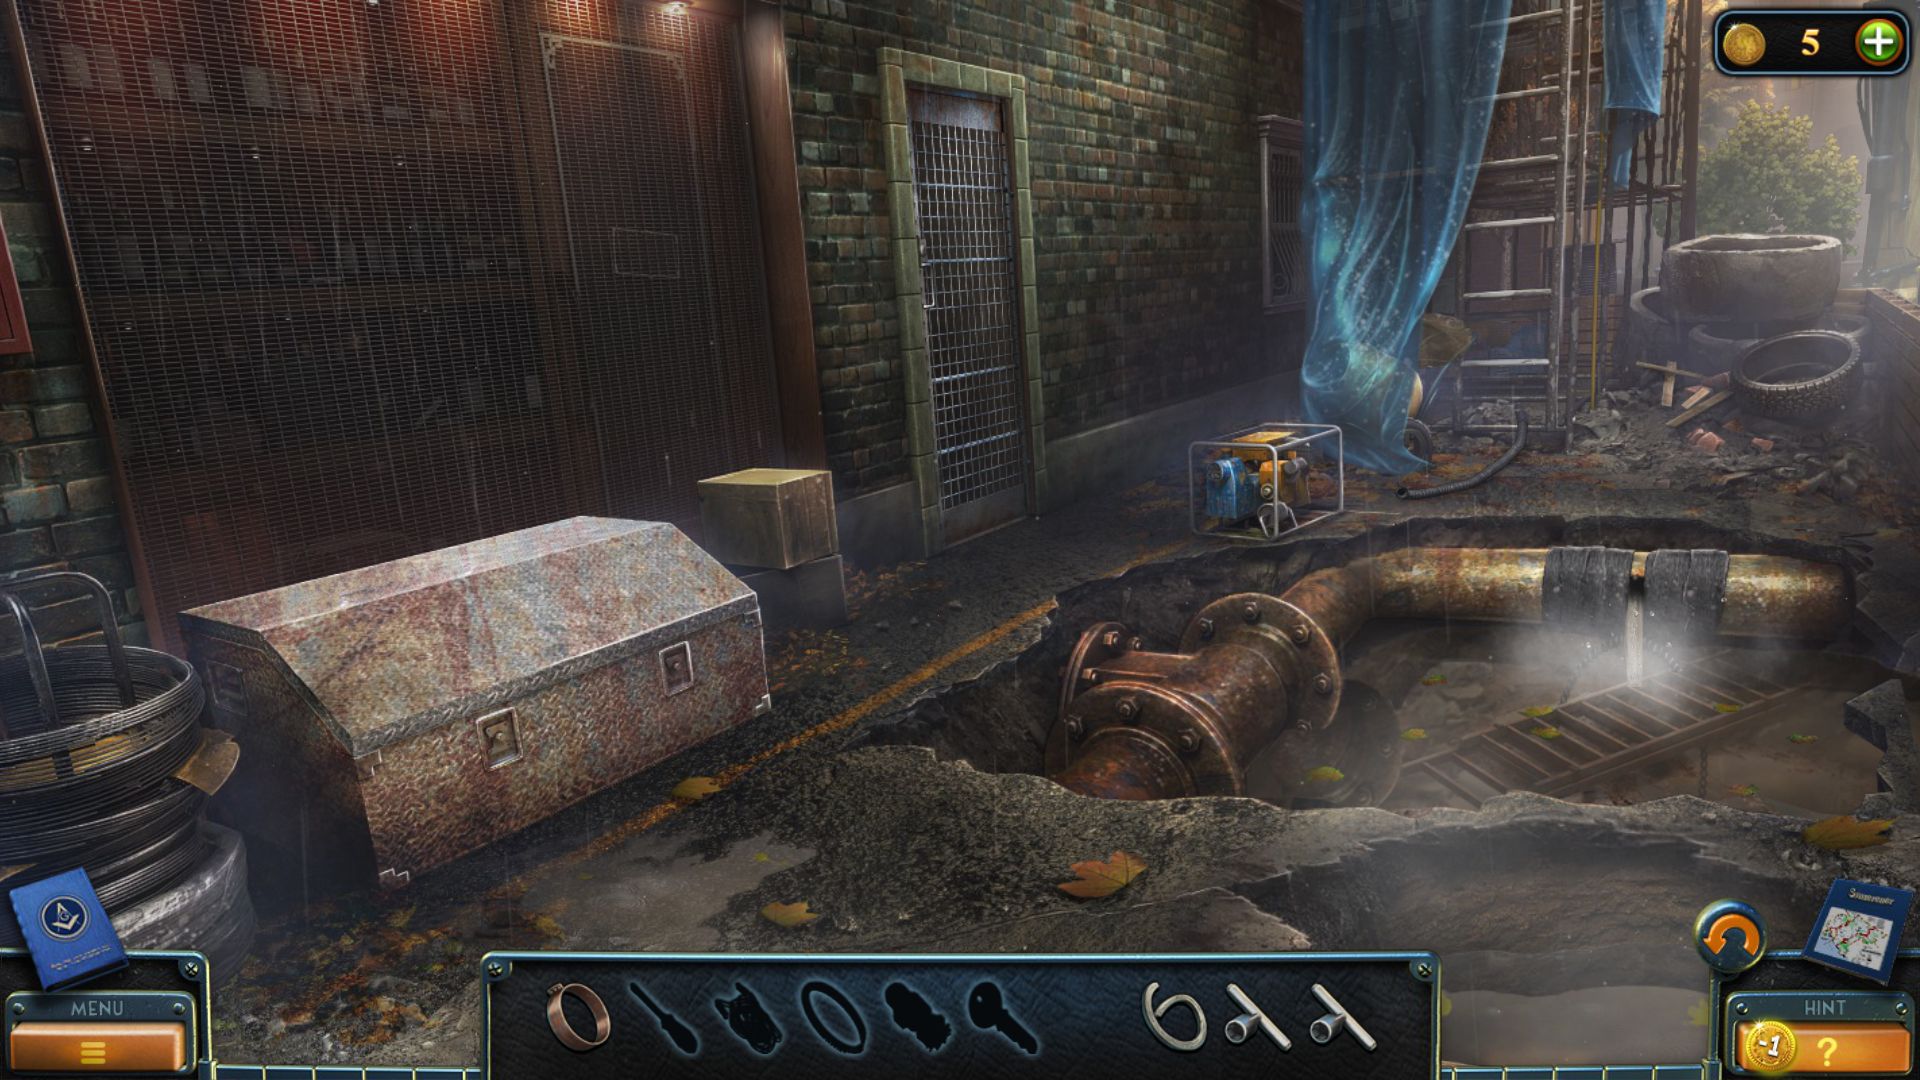 New York Mysteries 5 - Android game screenshots.